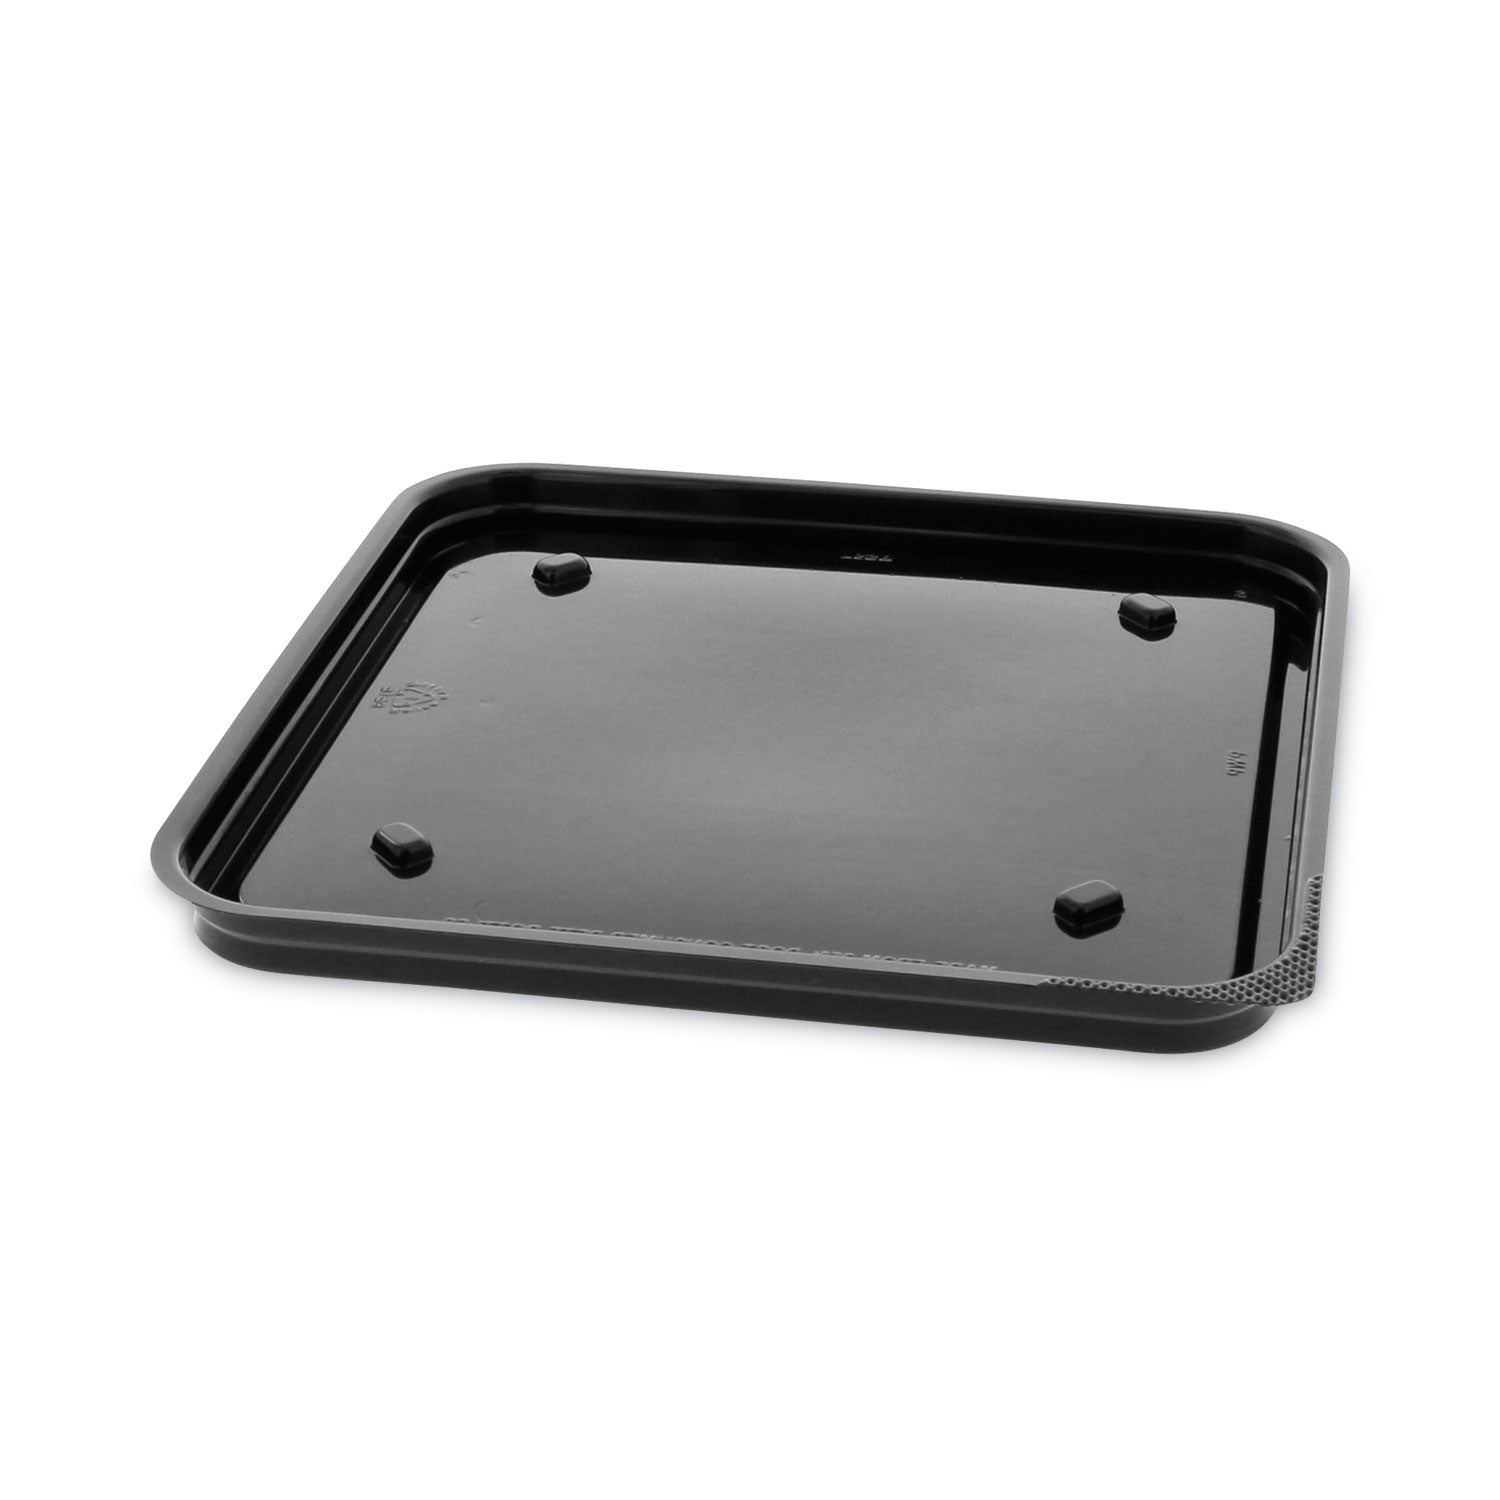 recycled-plastic-container-6-x-6-brownie-container-75-x-75-x-056-black-plastic-195-carton_pct75sbase - 2